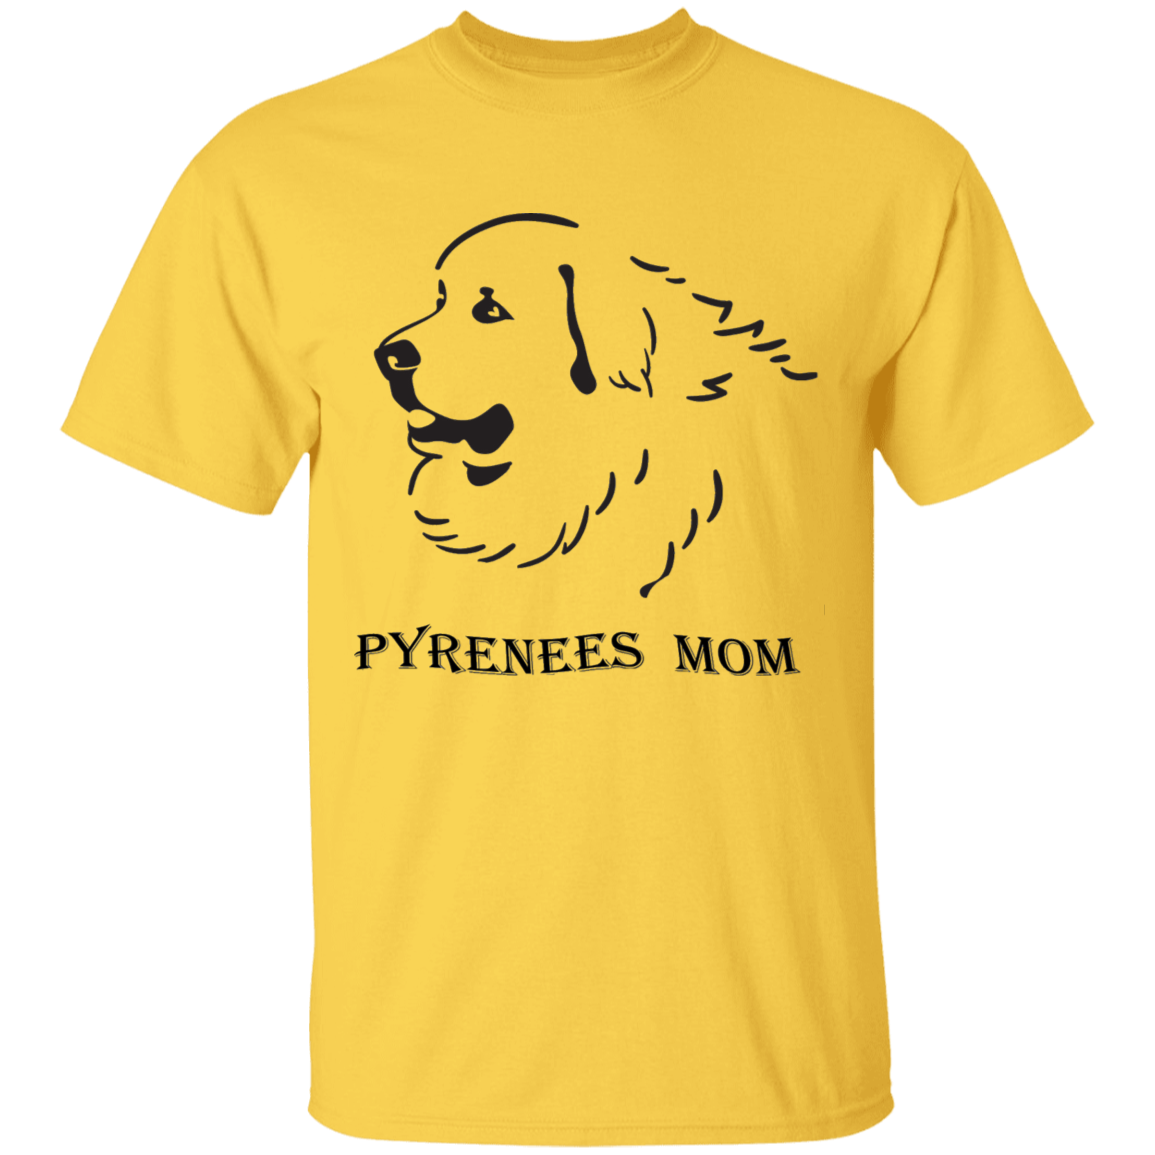 Great Pyrenees Mom T-Shirt